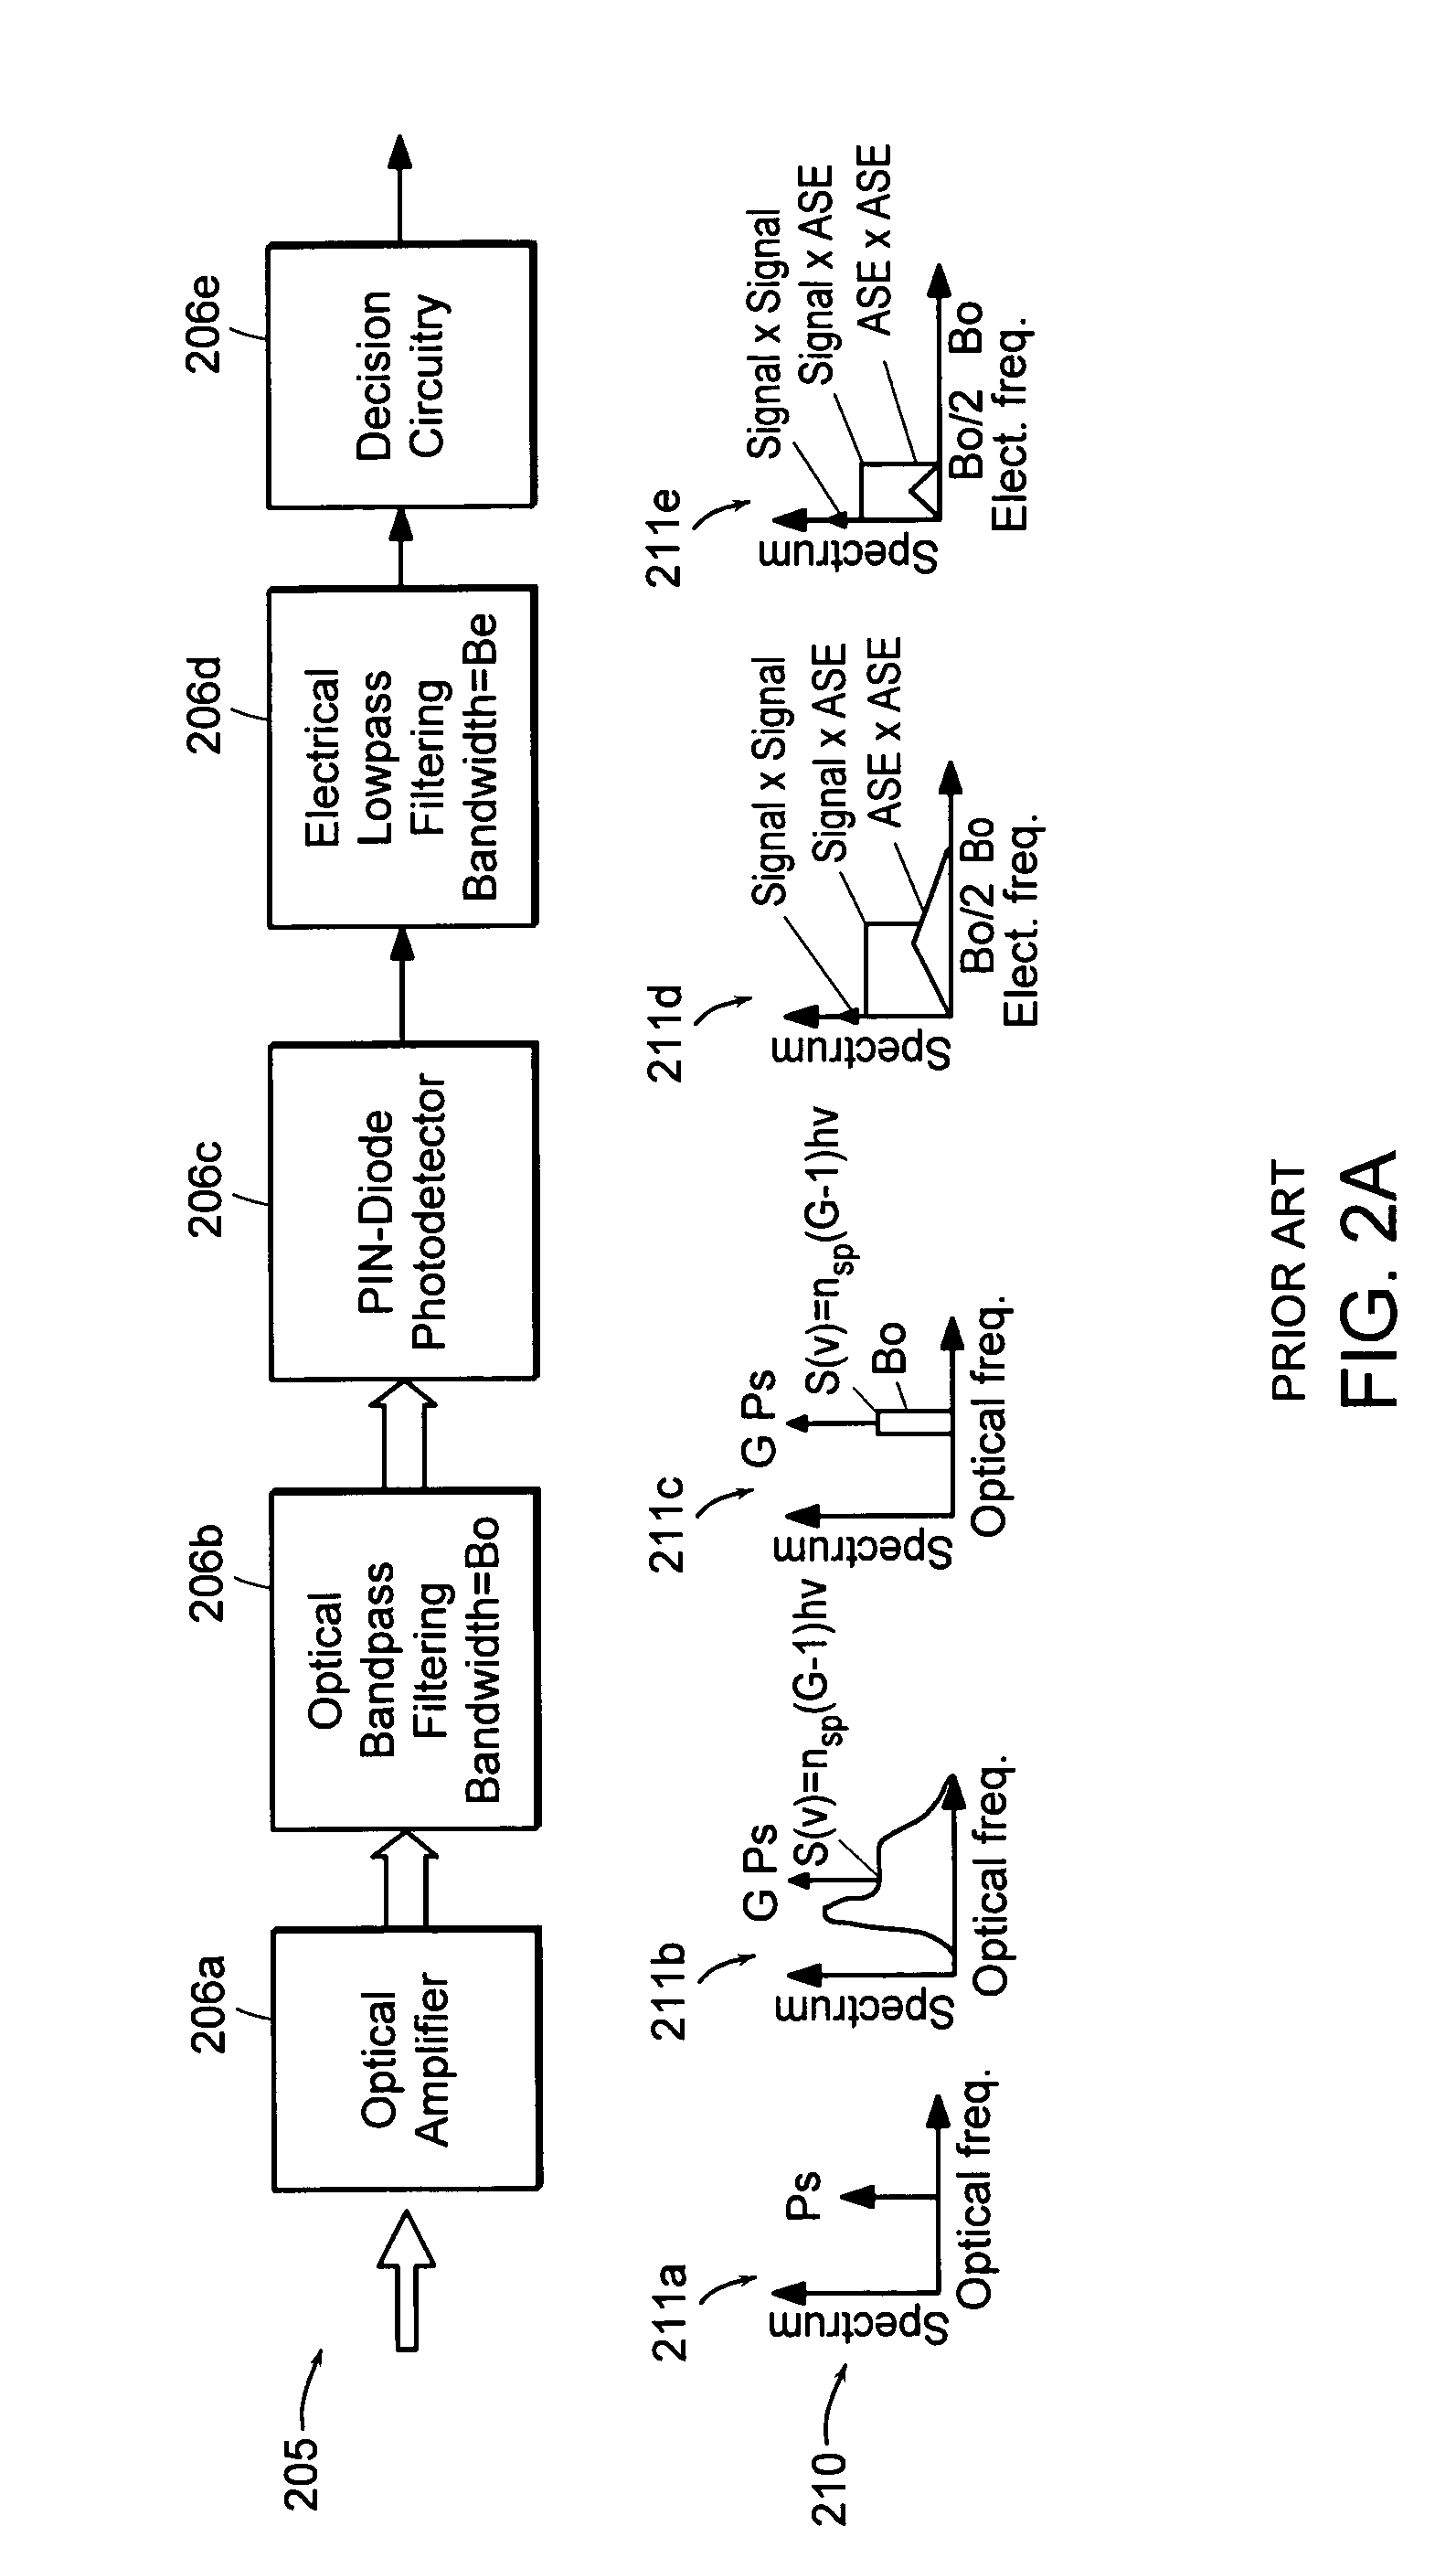 Methods of achieving optimal communications performance